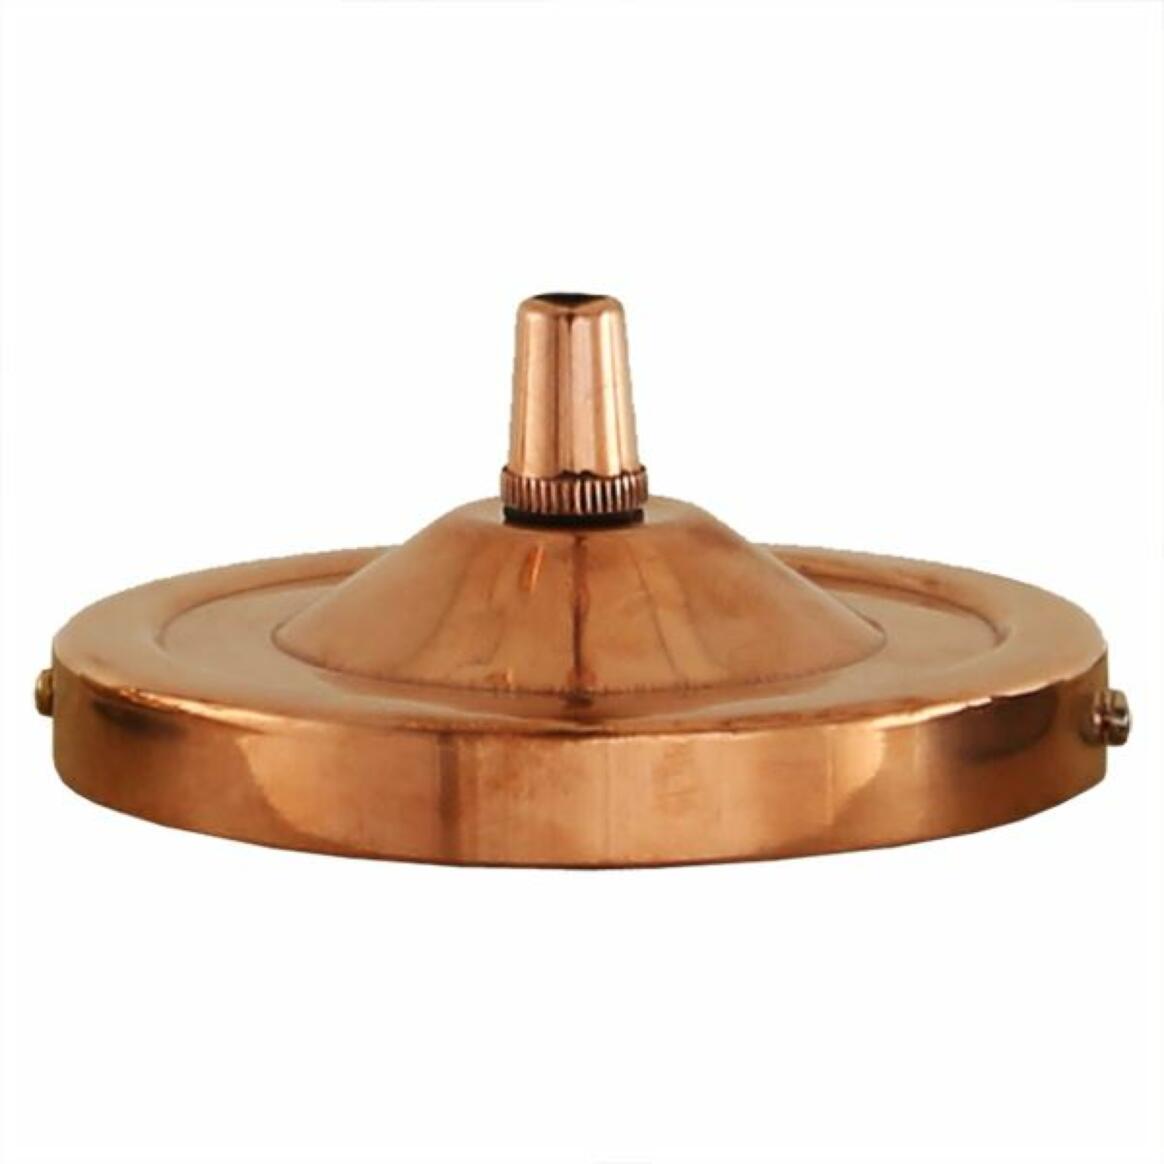 Brass ceiling rose light fitting, flat round with cord grip main product image